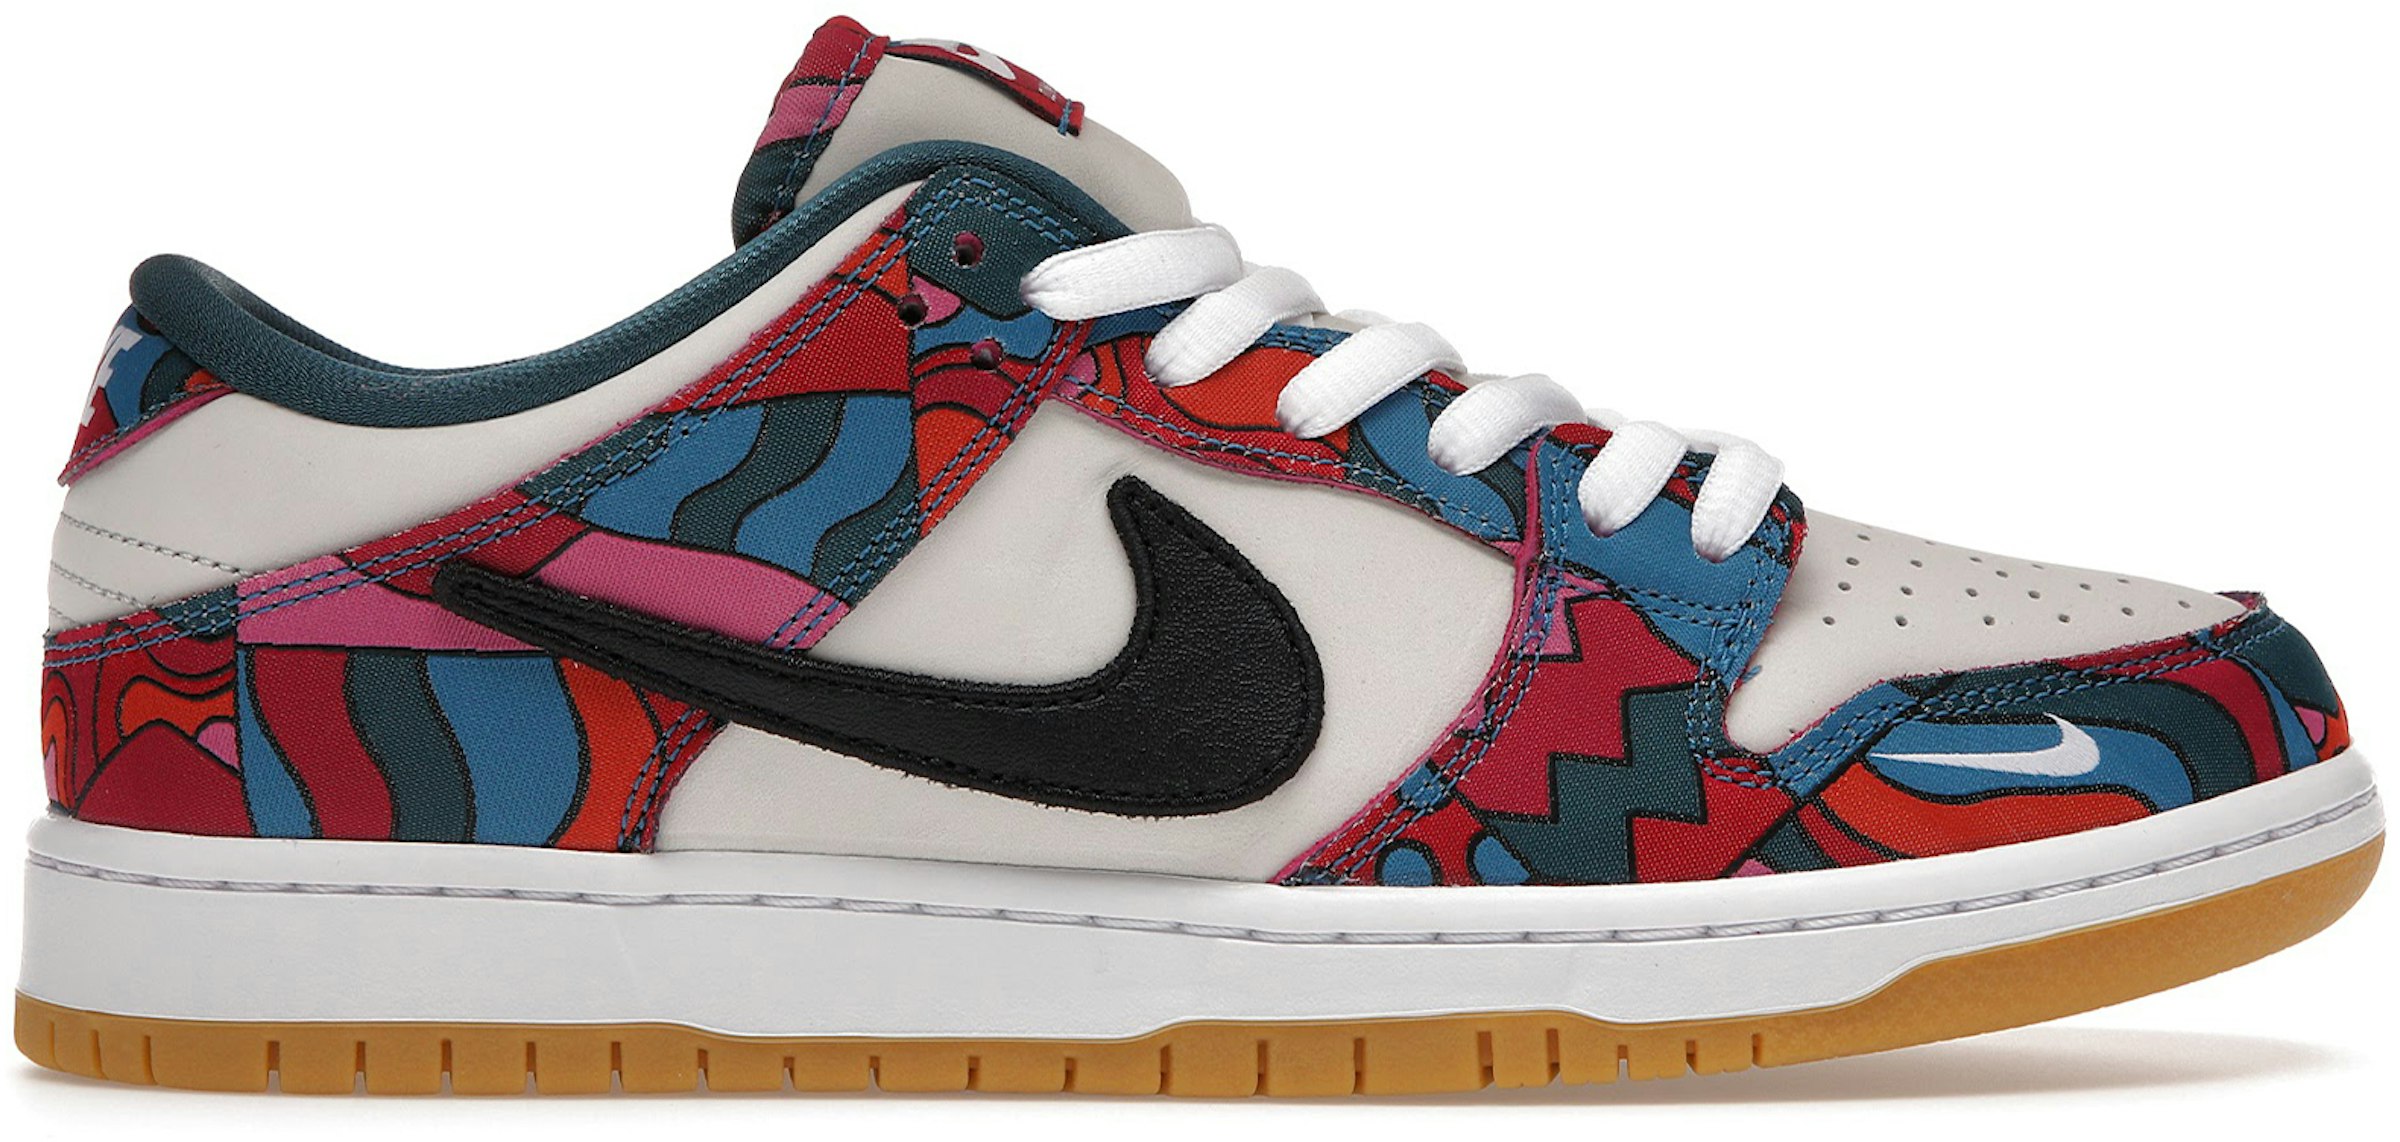 Nike SB Dunk Low Pro Abstract Art (2021) Hombre - DH7695-600 - MX